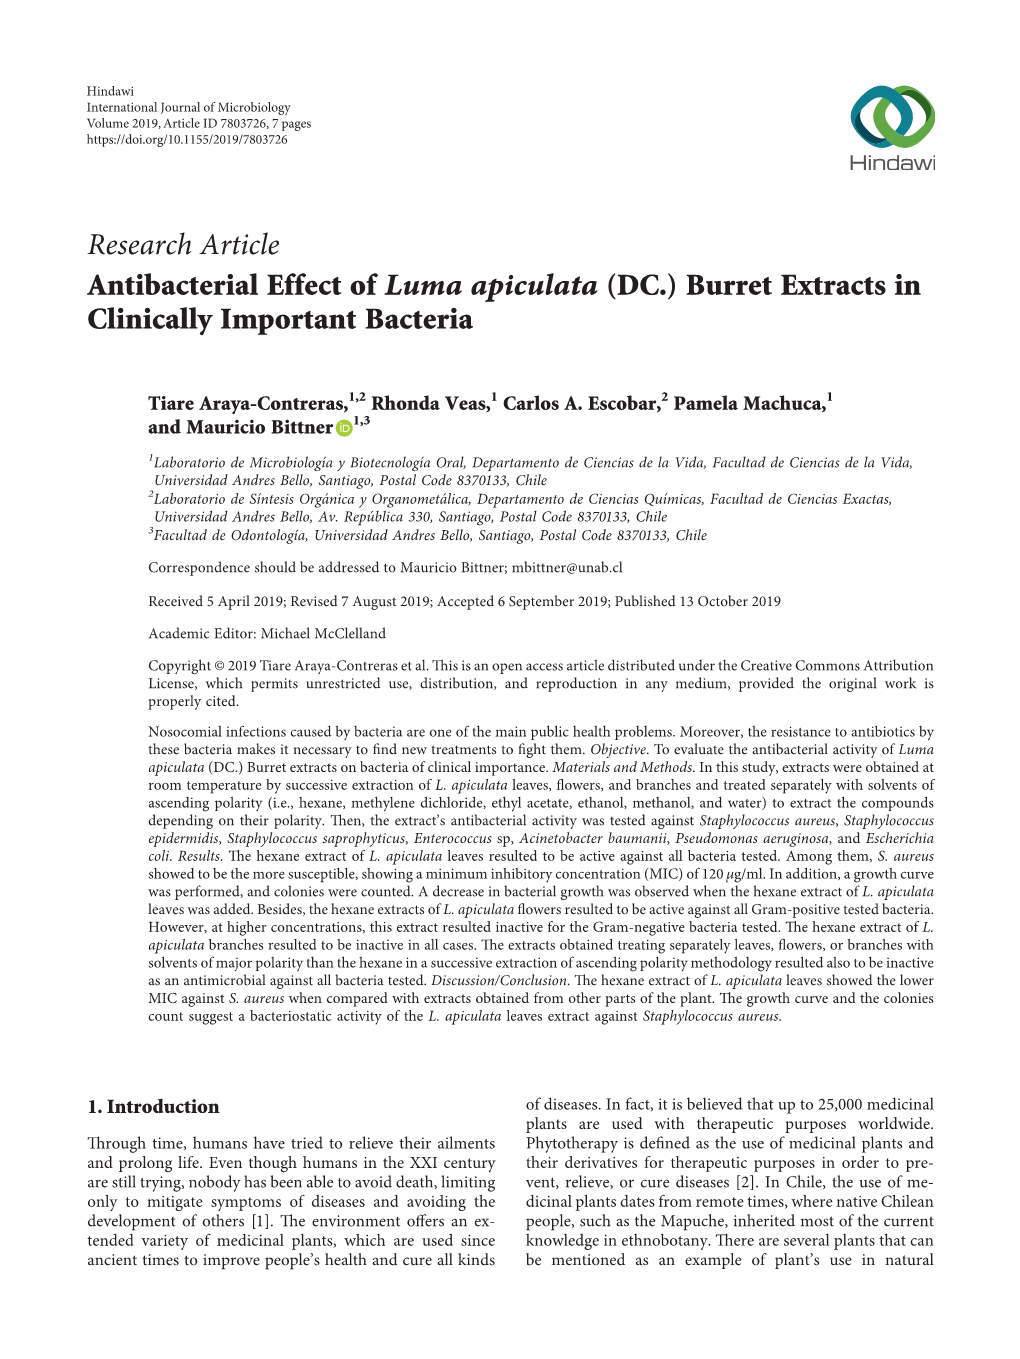 Antibacterial Effect of Luma Apiculata (DC.) Burret Extracts in Clinically Important Bacteria